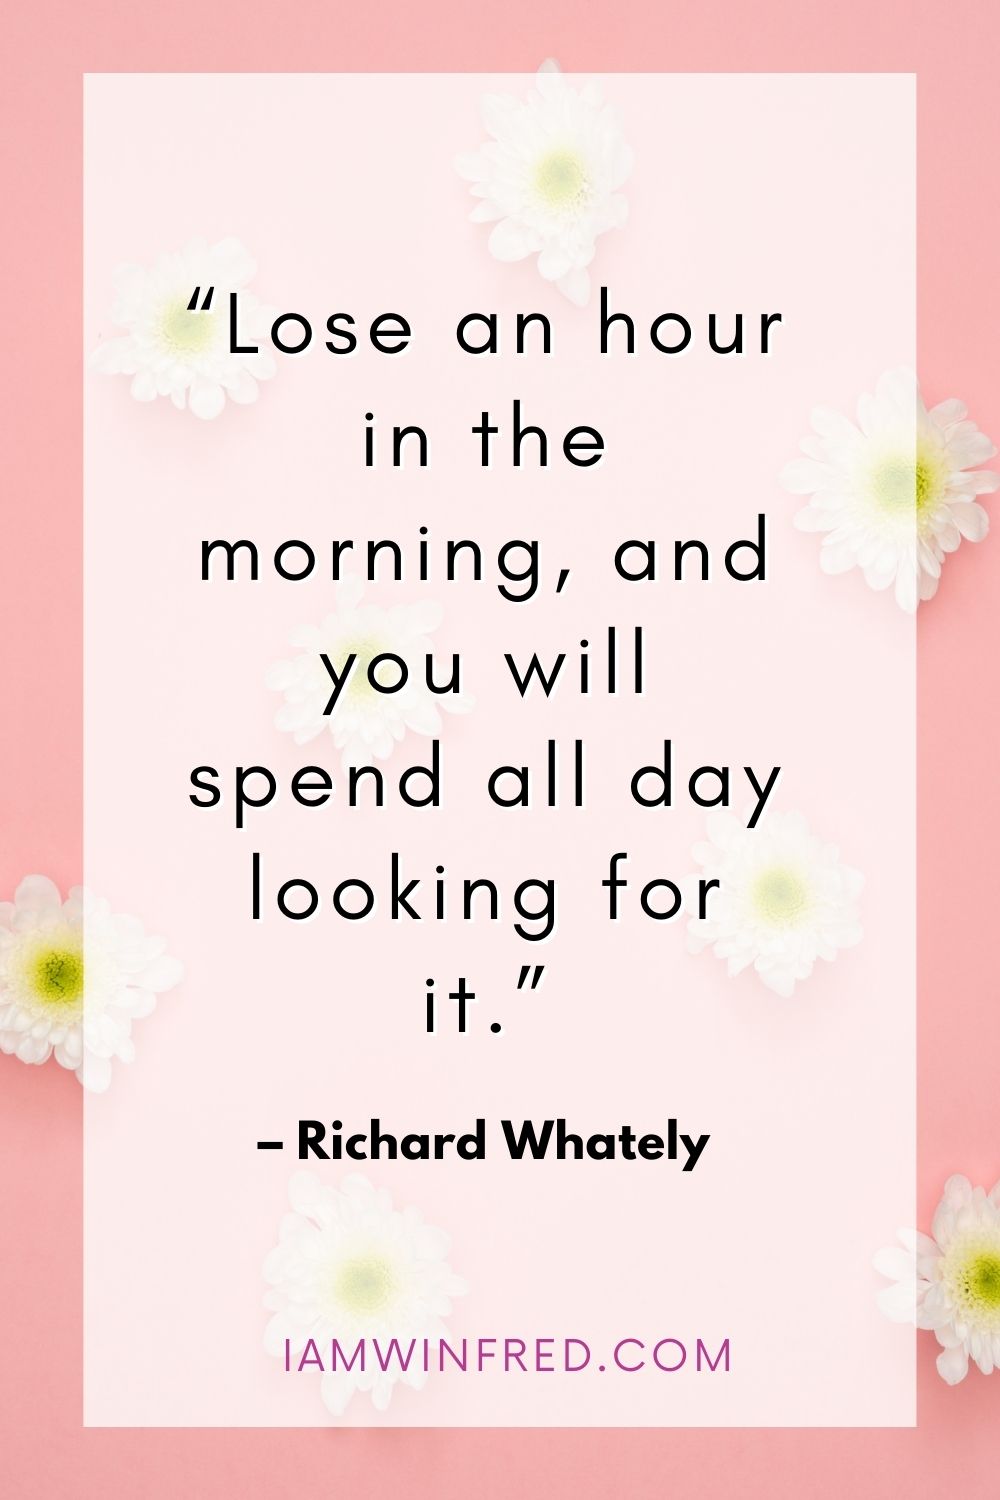 Lose An Hour In The Morning And You Will Spend All Day Looking For It.